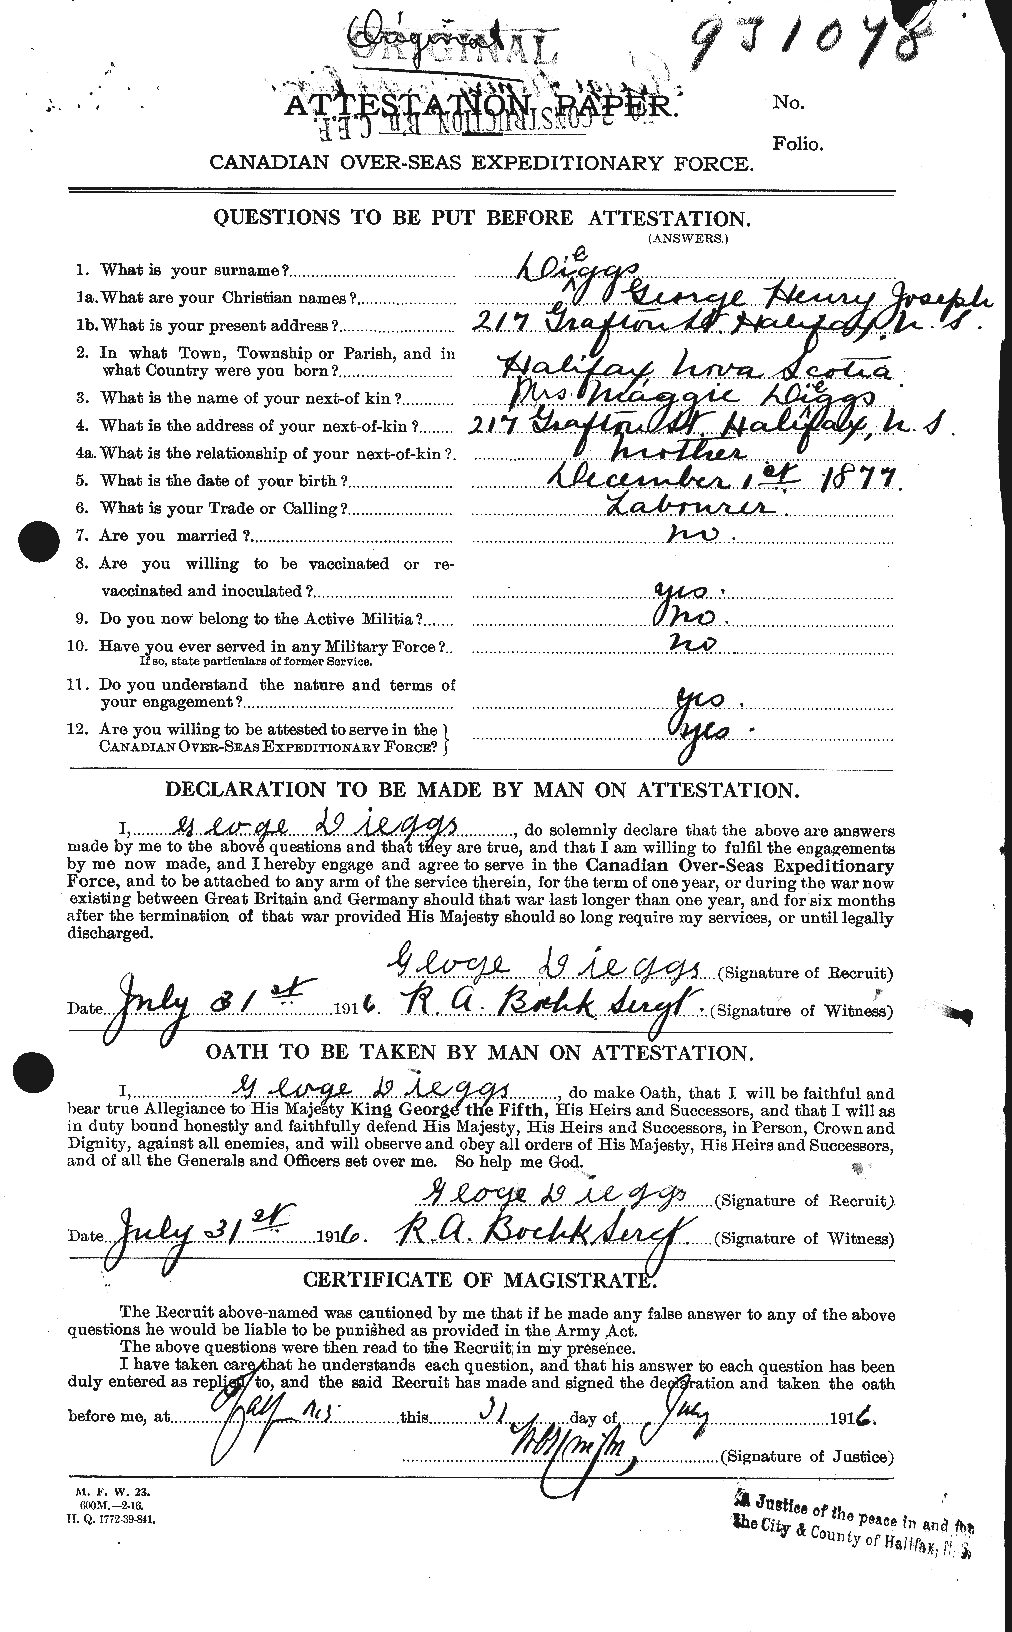 Personnel Records of the First World War - CEF 291753a